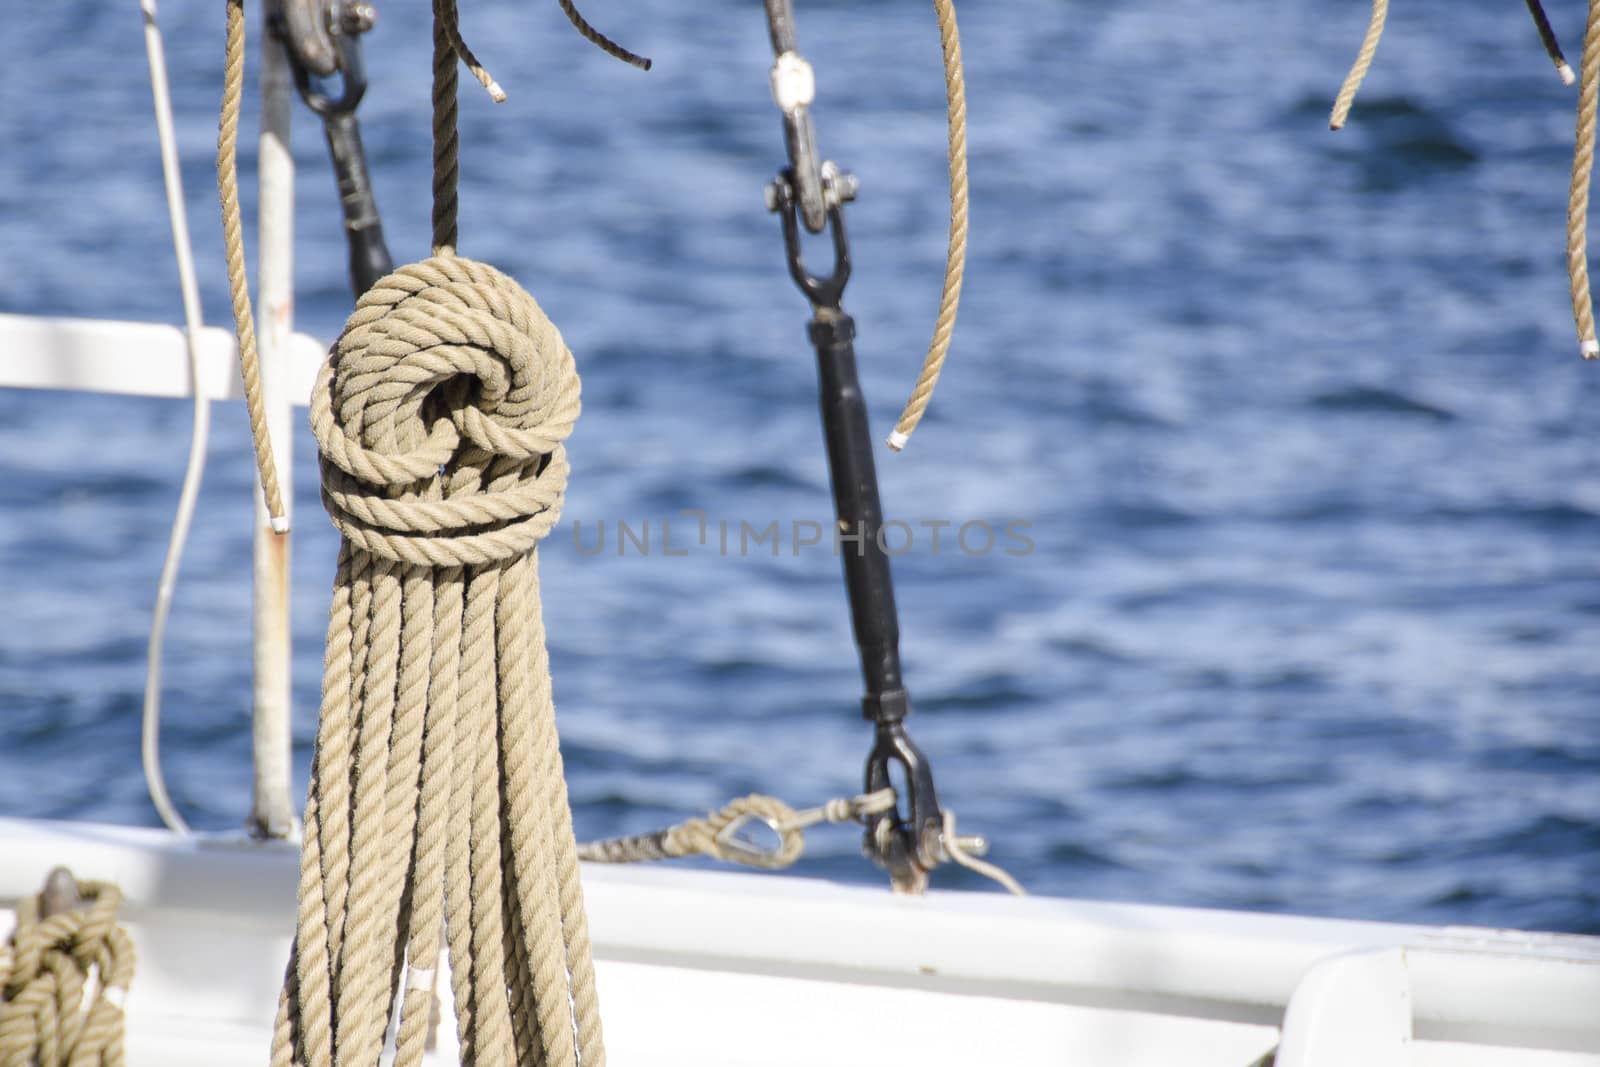 Ropes detail on an old sail ship hanging in front of blue water